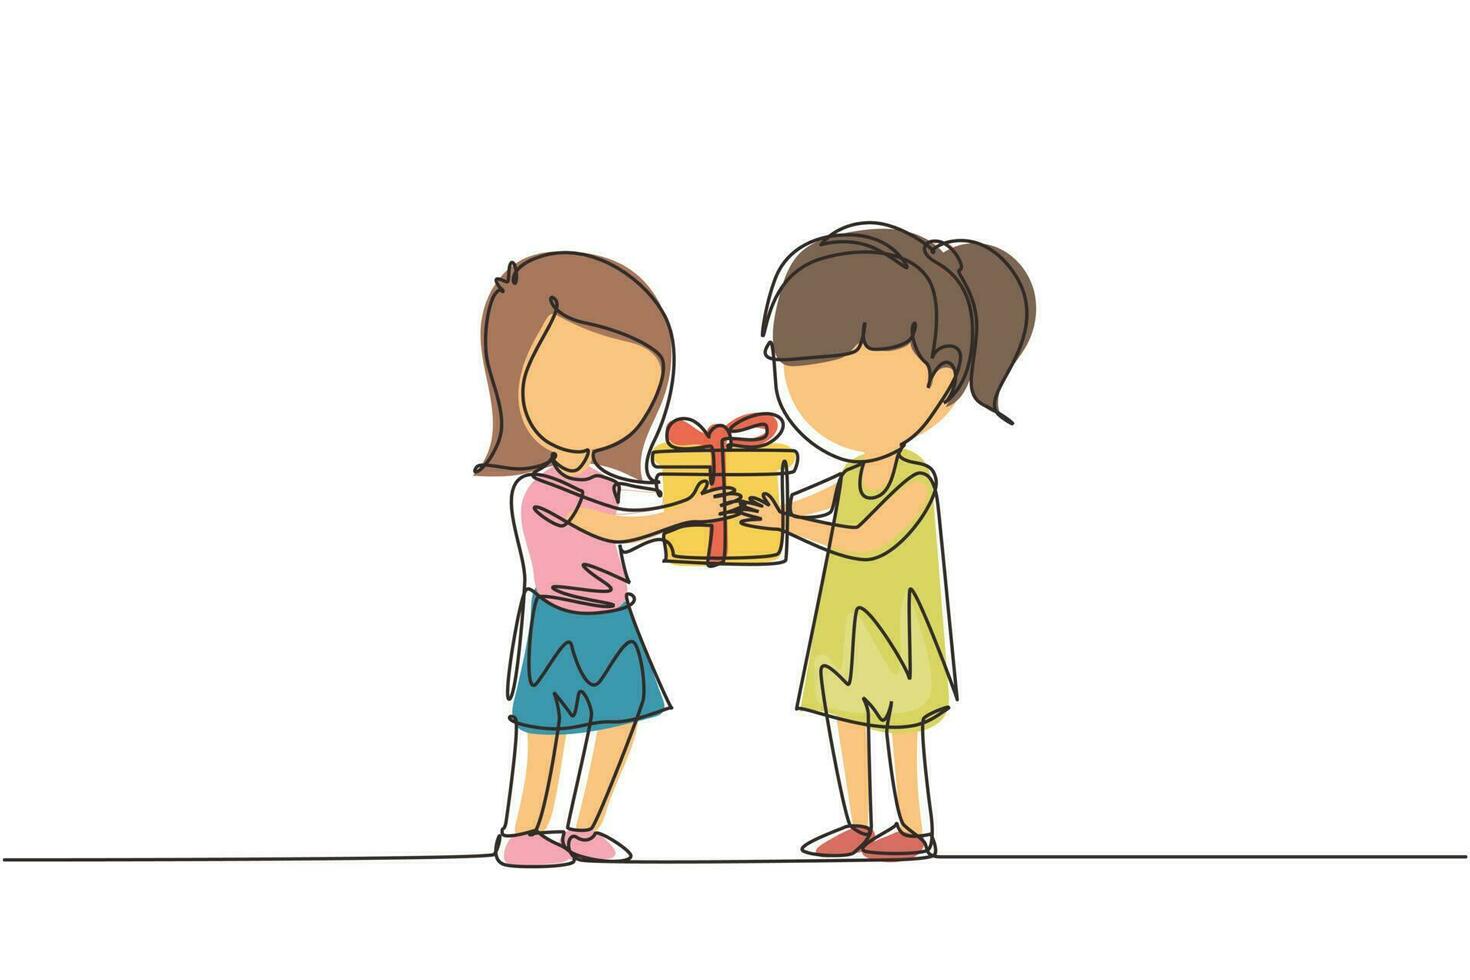 Single one line drawing girl giving her friend birthday ribbon bow gift box. Children excited receiving gift from friend. Child hand over holiday present. Continuous line draw design graphic vector